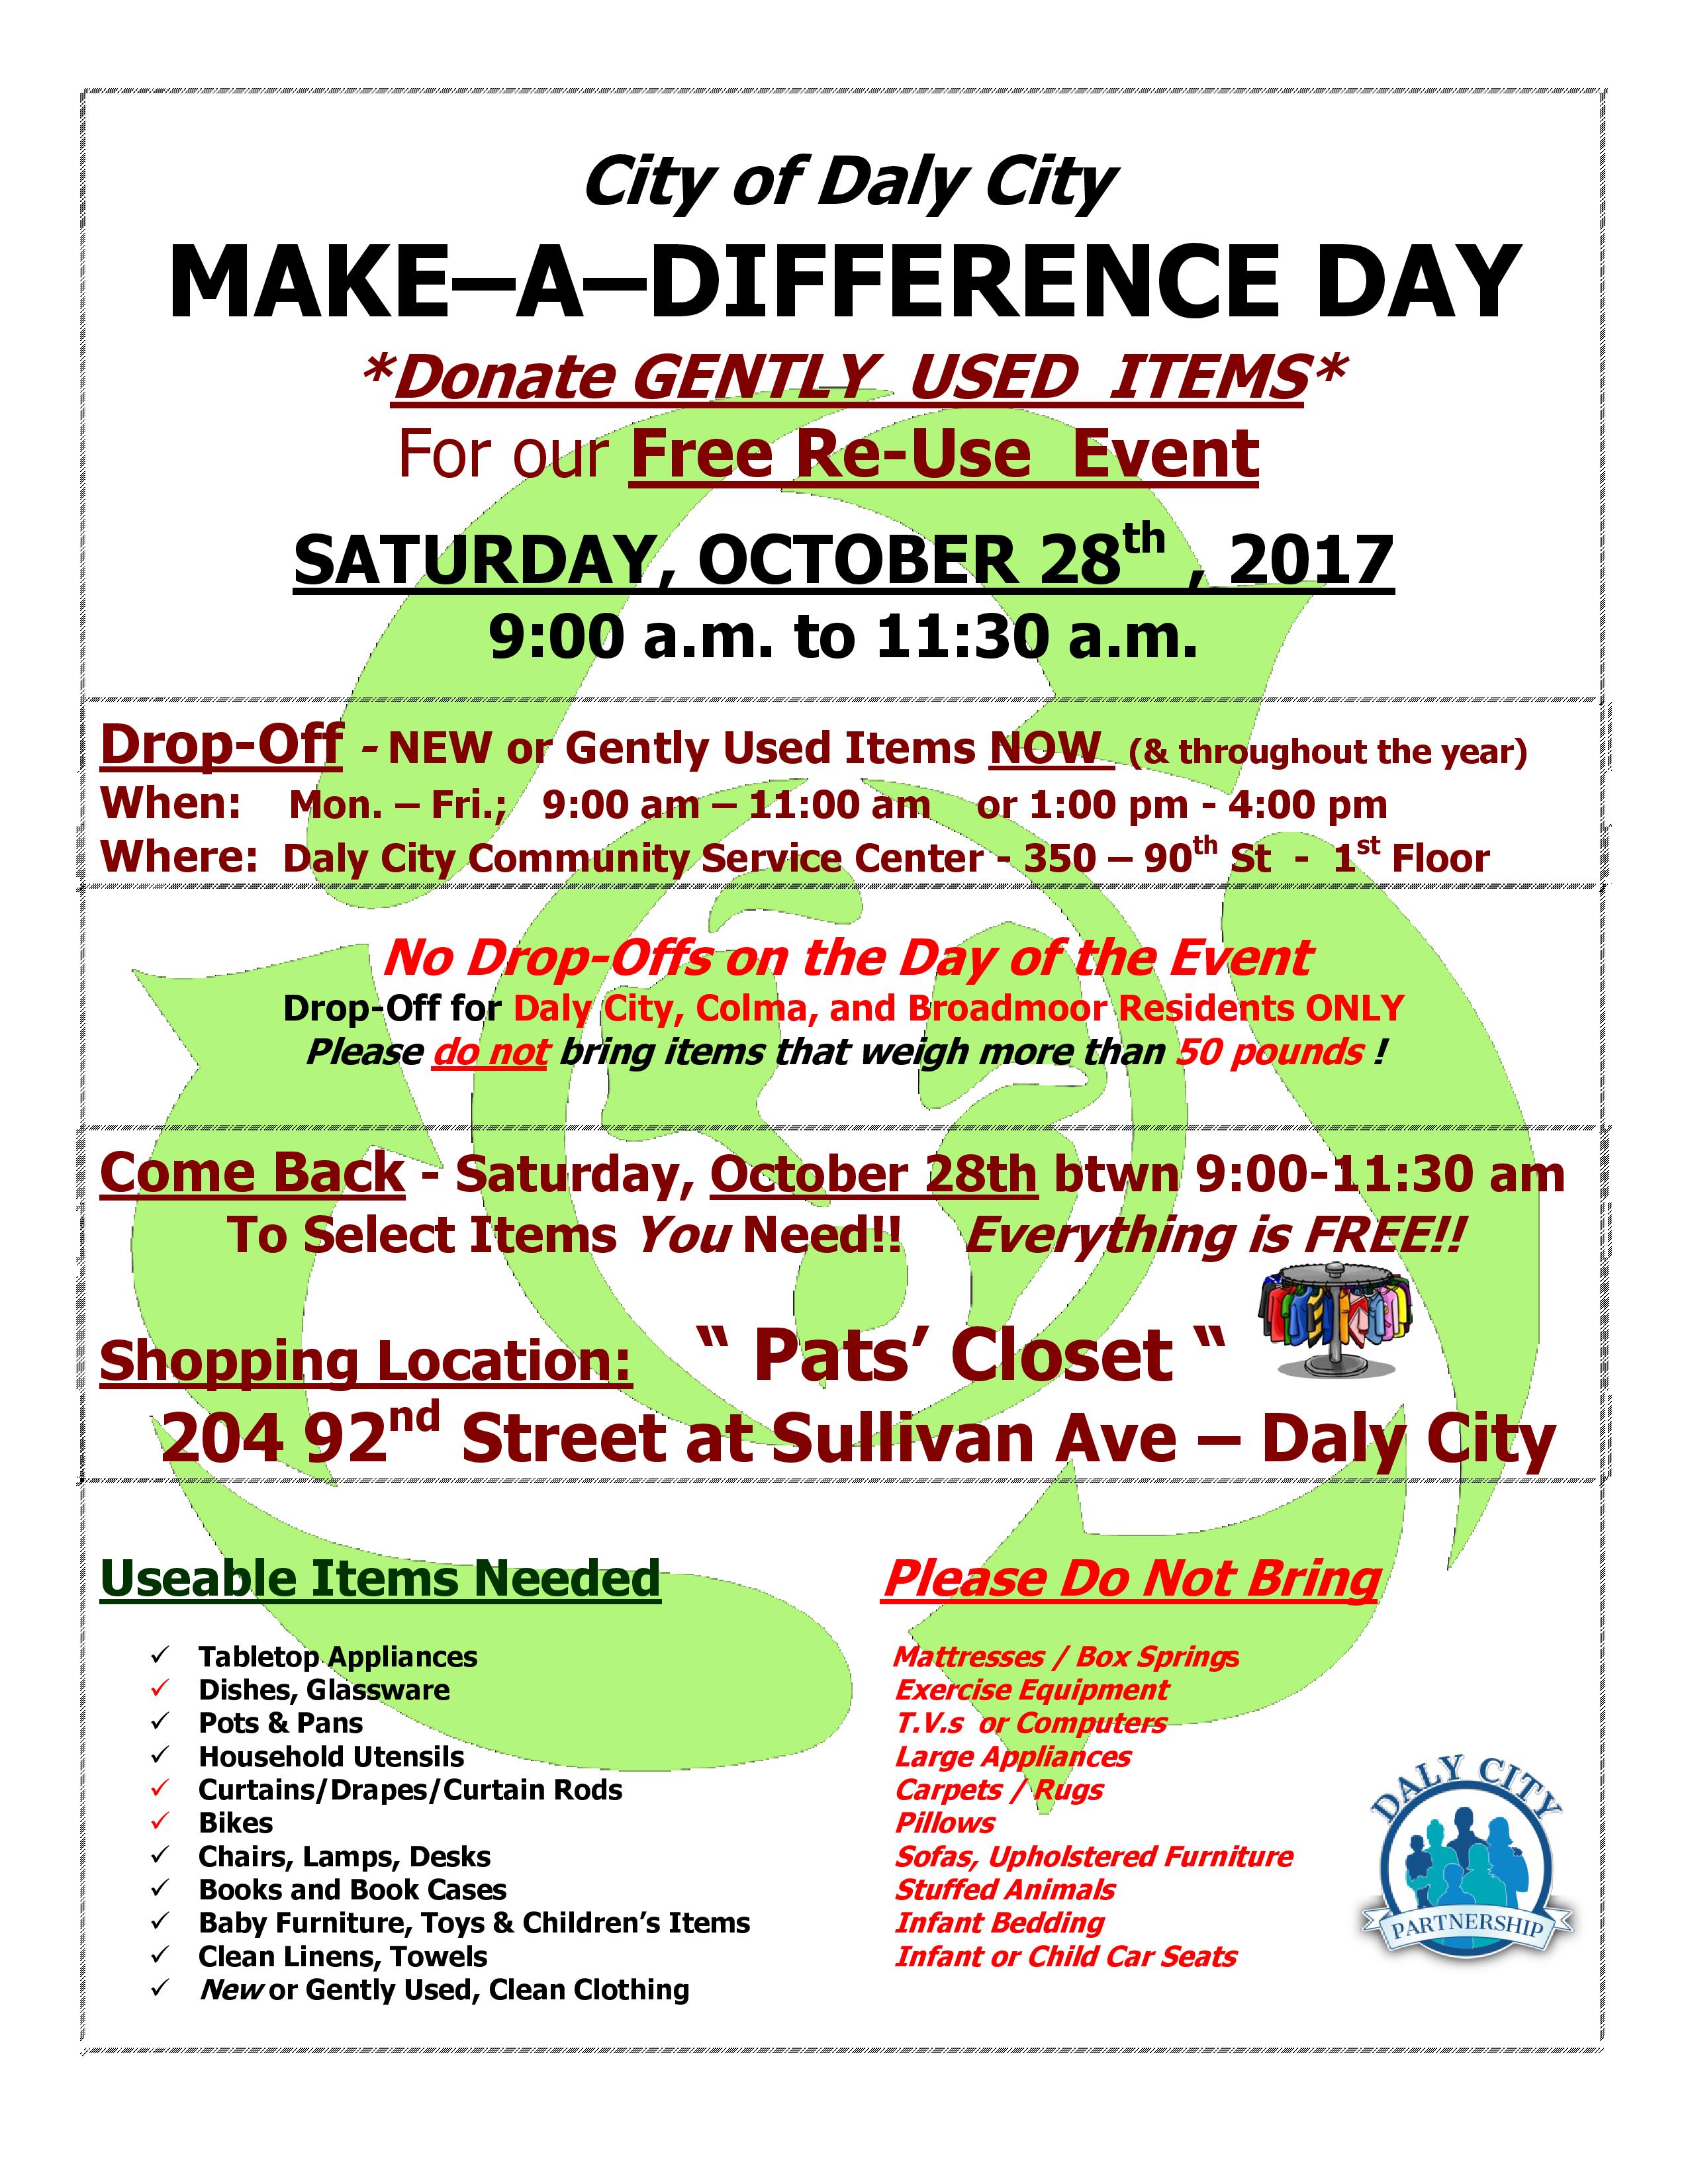 Make A Difference Day 2017